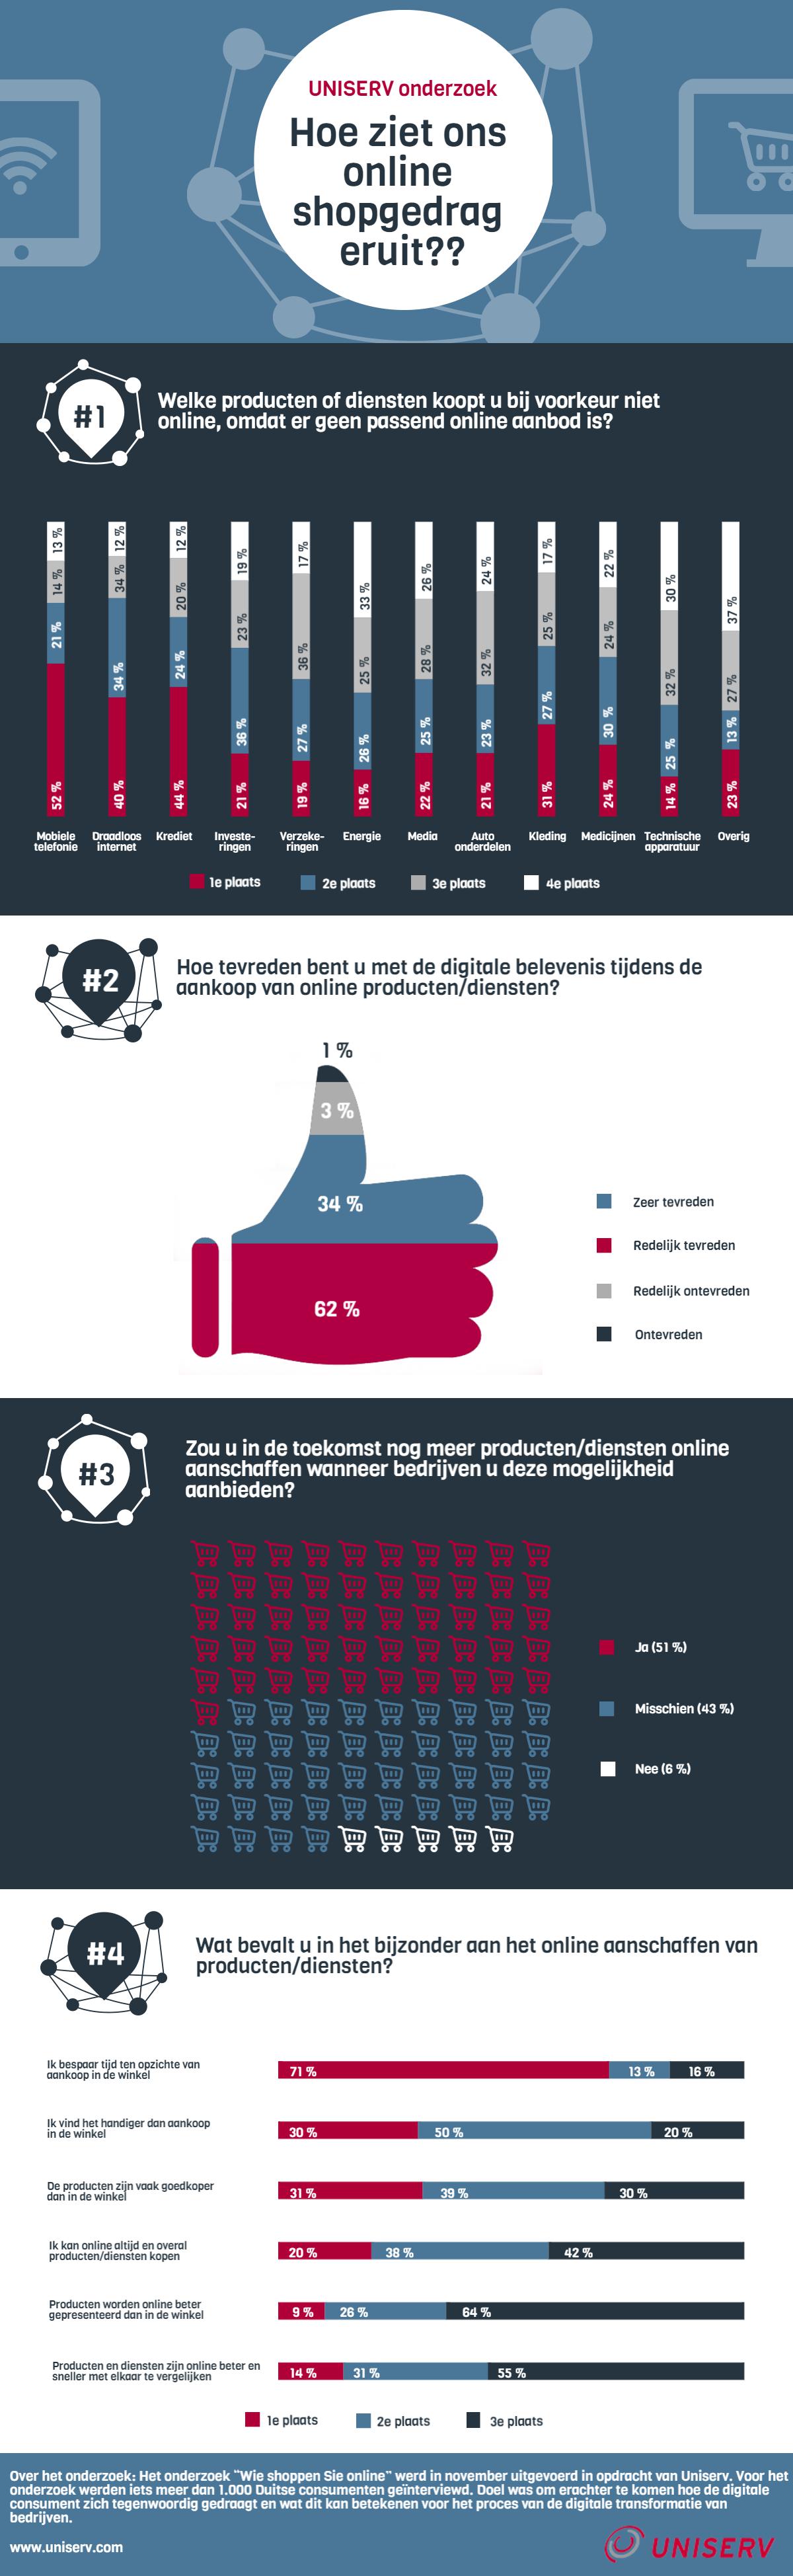 Ons online shopgedrag - infographic